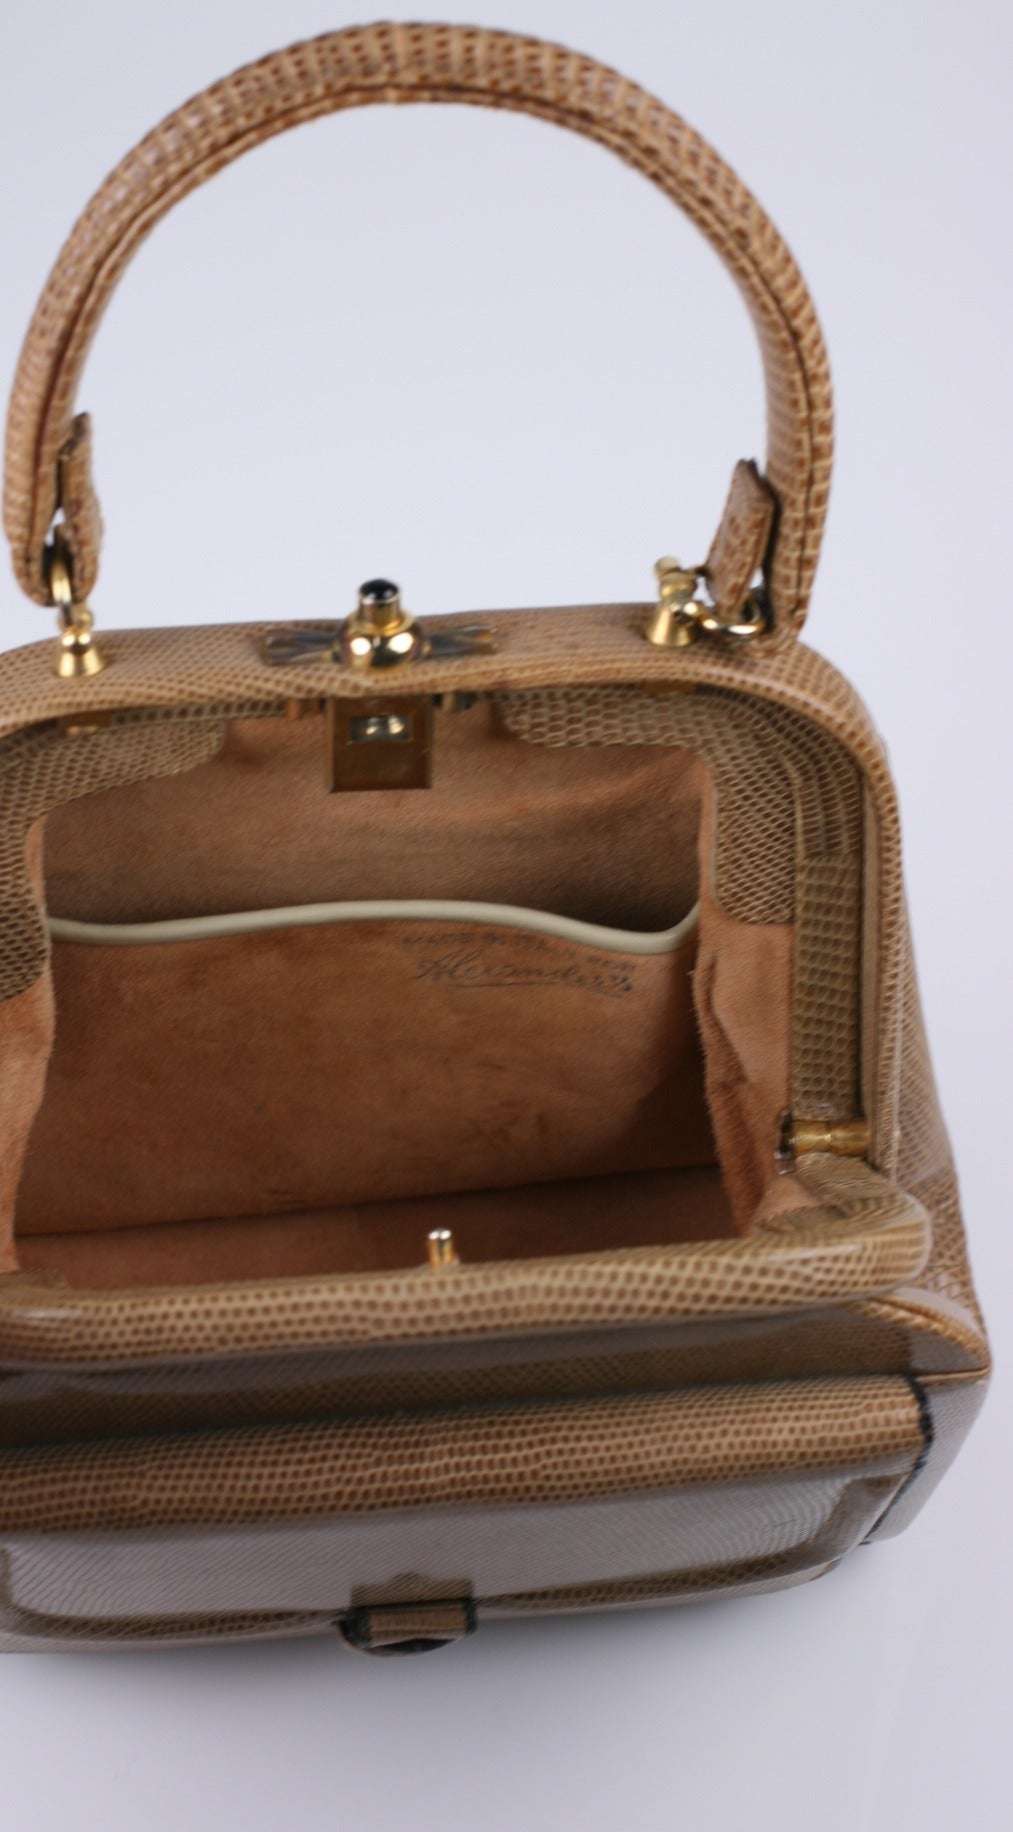 Charming Lizard Mini Satchel In Excellent Condition For Sale In New York, NY